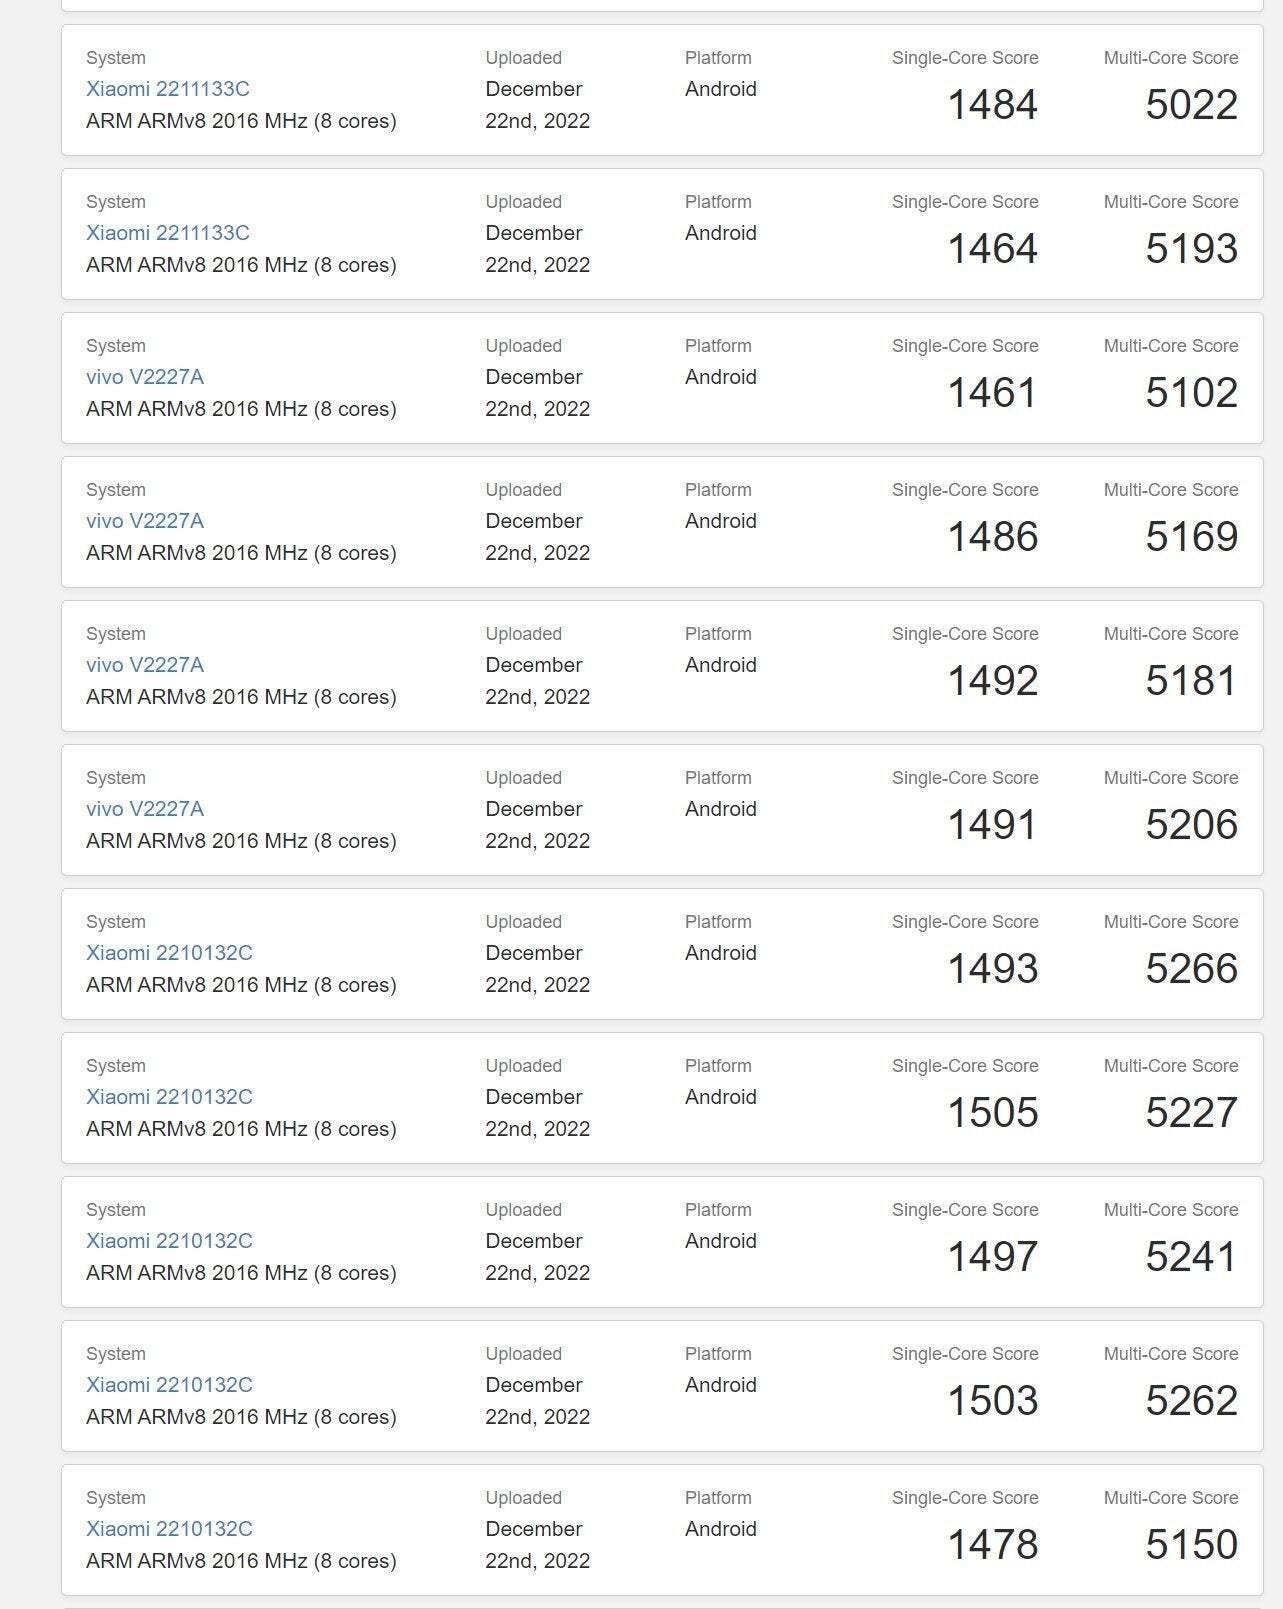 Other Qualcomm 8 Gen 2 phones Geekbench results (Image Source - IceUniverse, Twitter) - Bad news from Galaxy S23 series benchmark results? Leaker suspects issues with heat